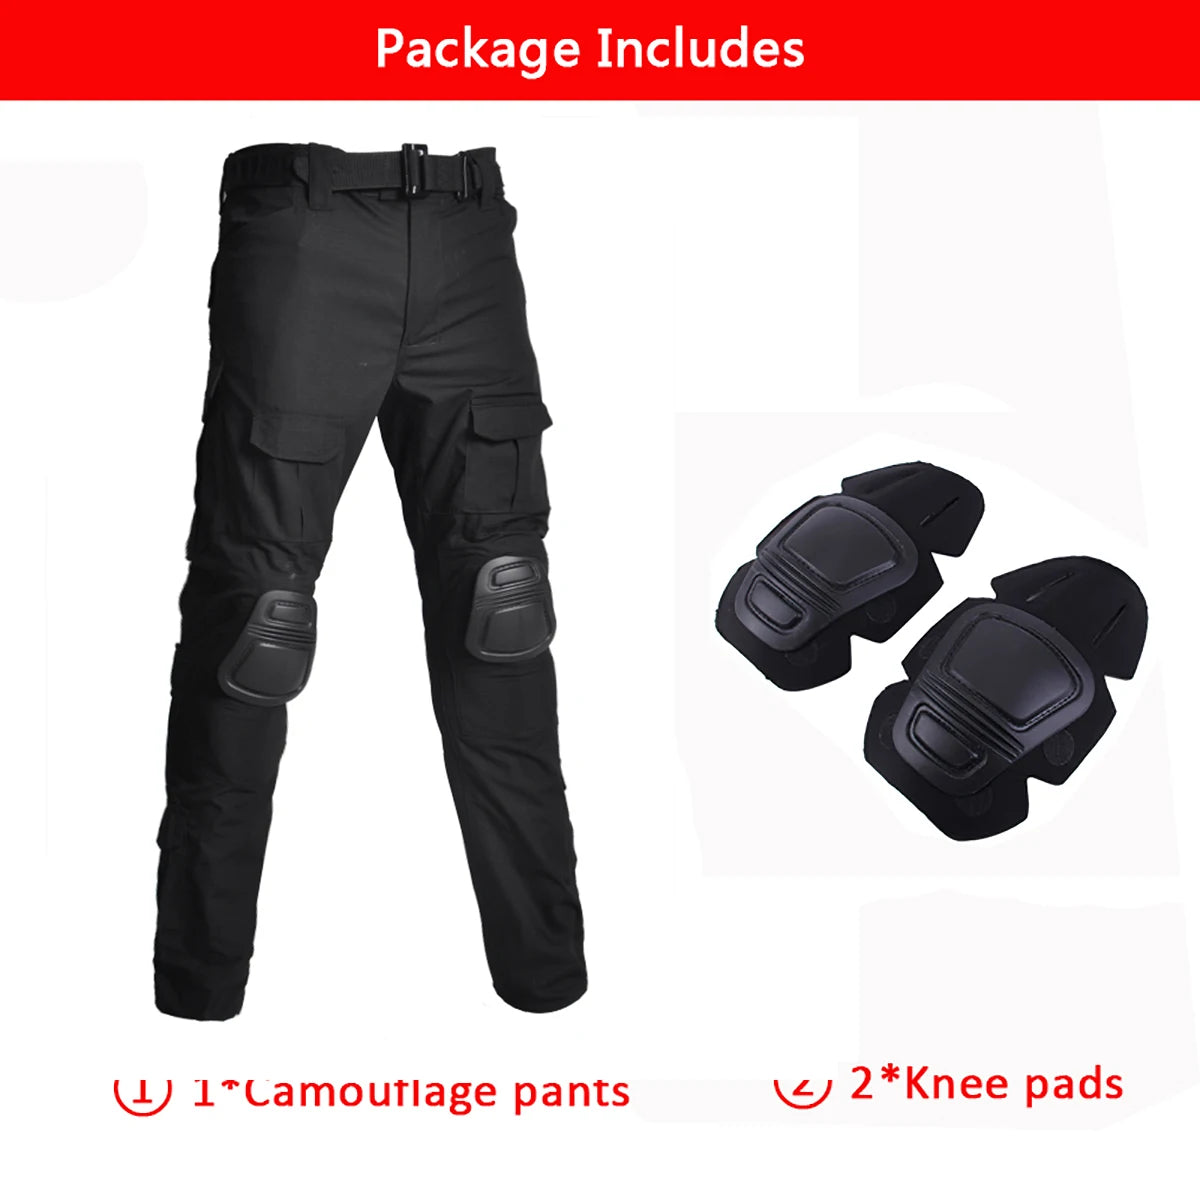 Multicam Camouflage Military Tactical Pants Army Wear-resistant Hiking Pant Paintball Combat Pant With Knee Pads Hunting Clothes black pants